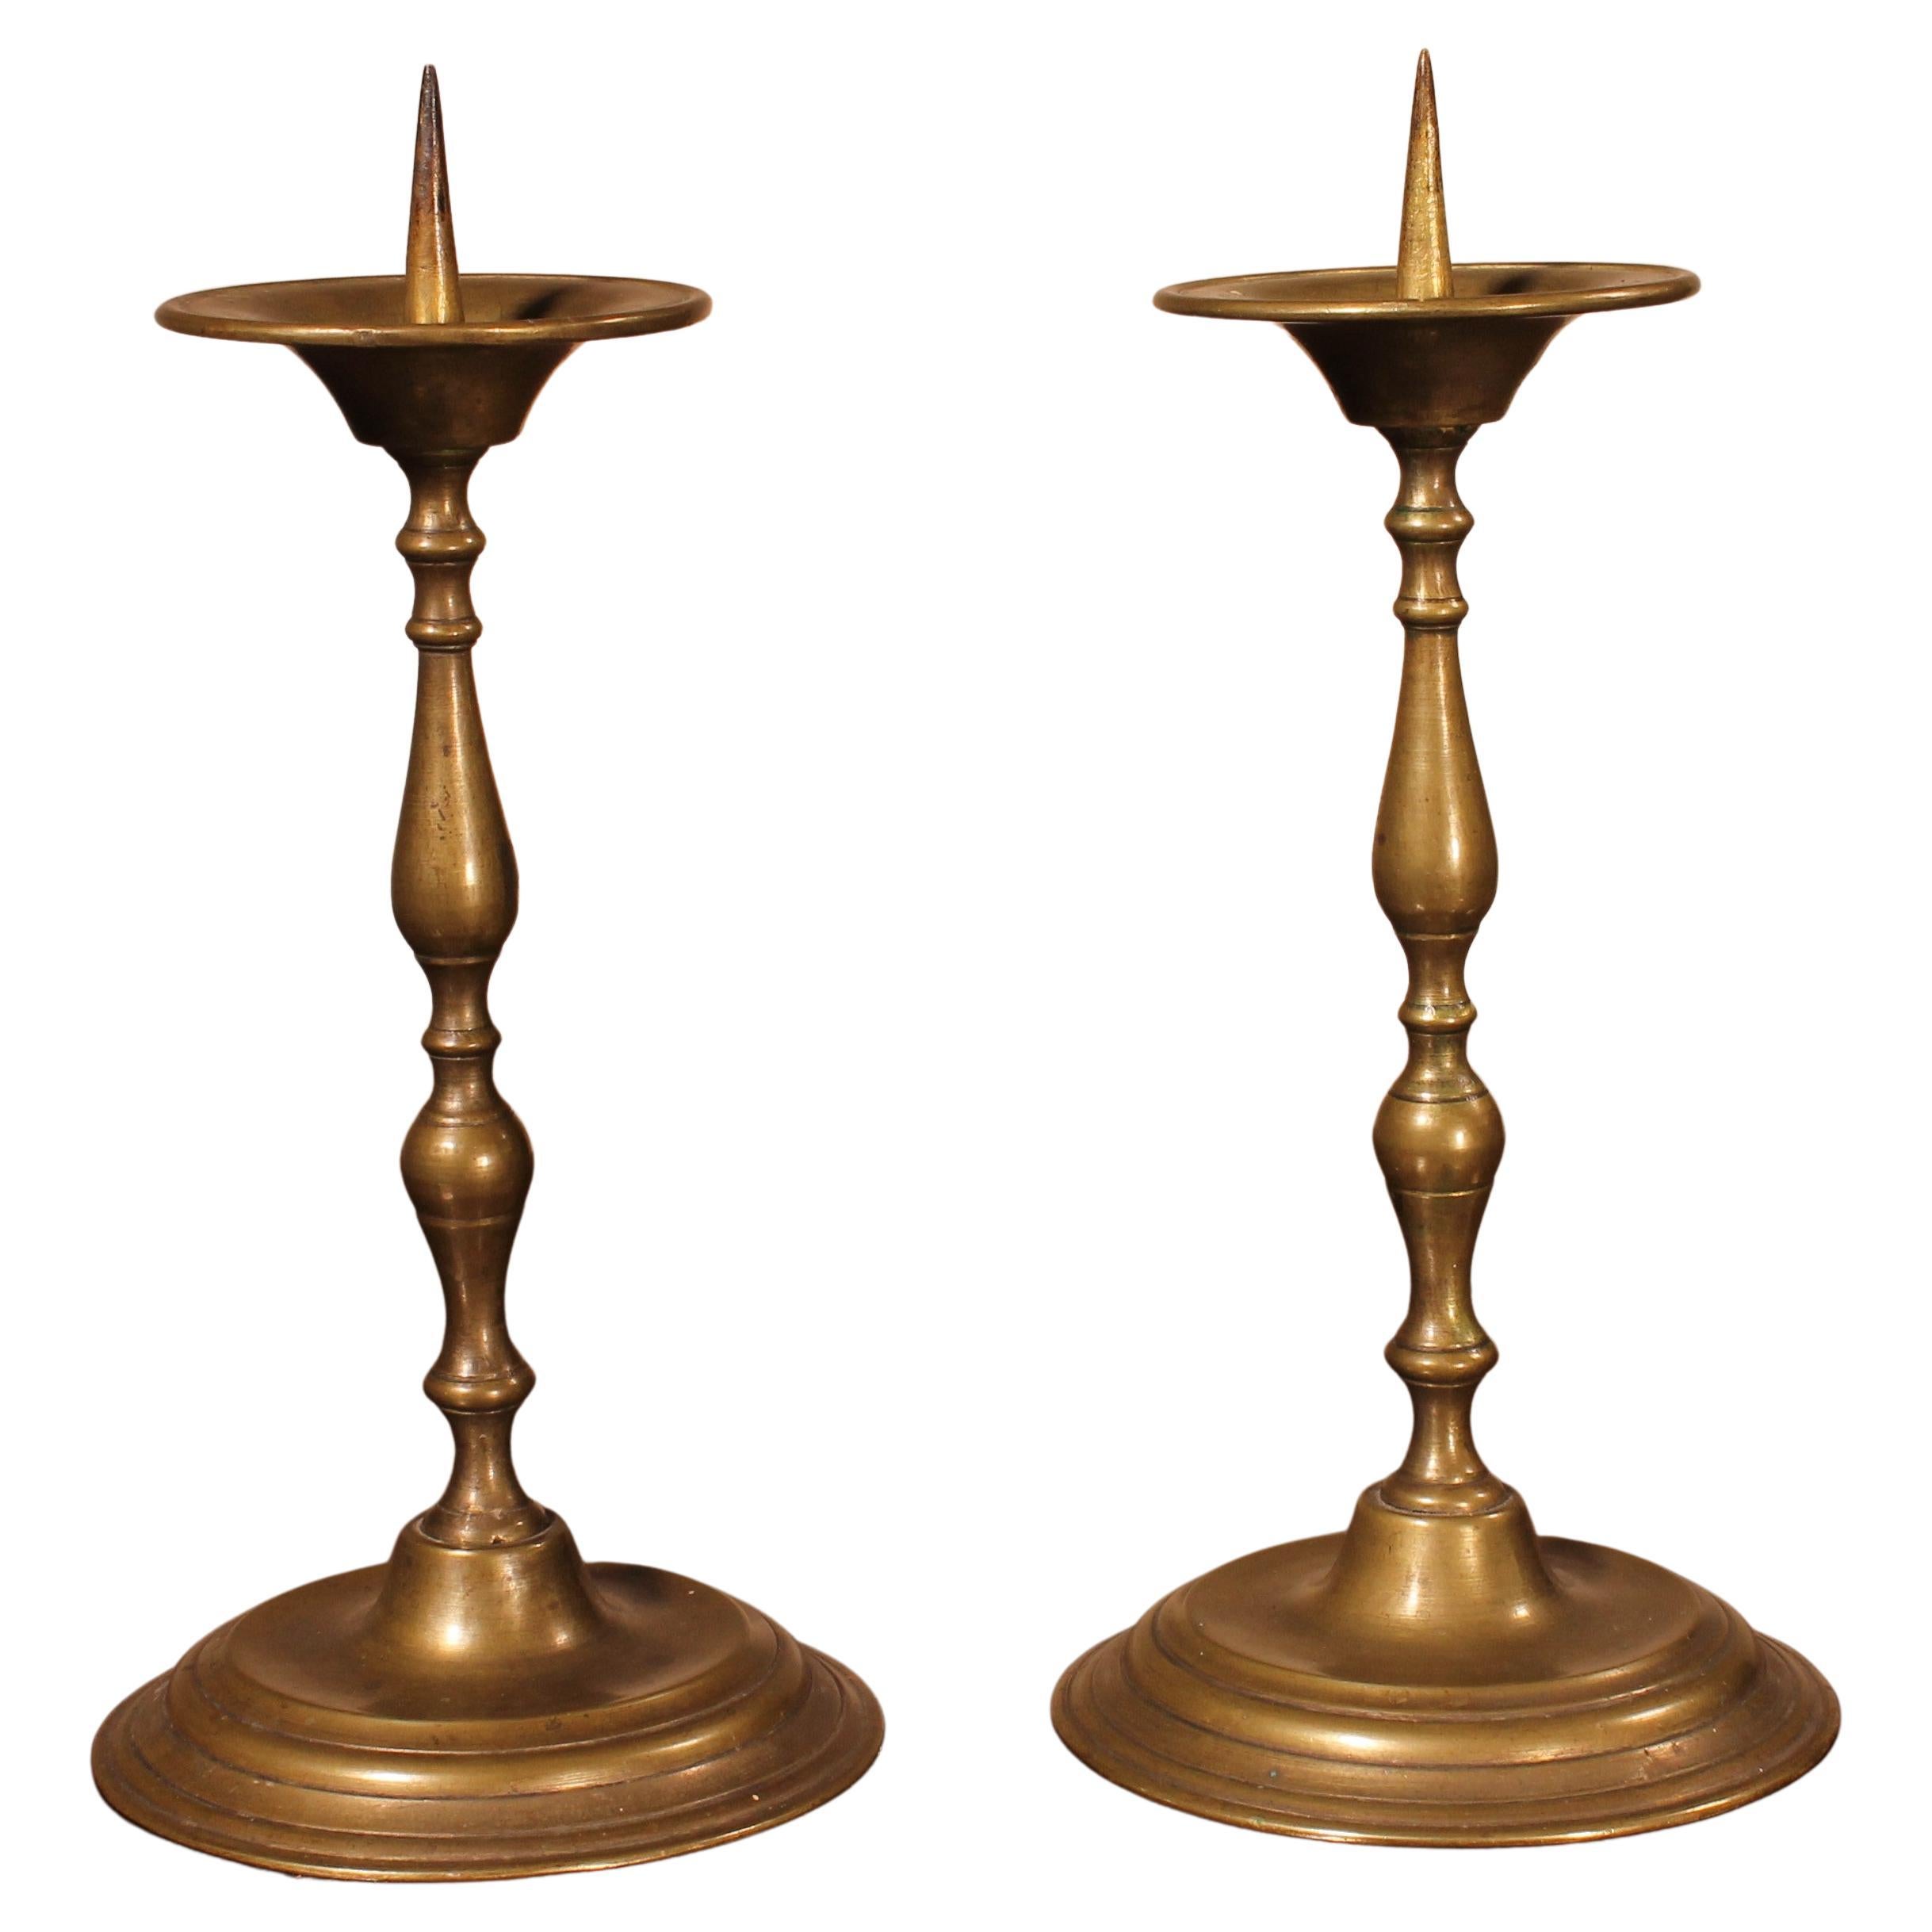 Pair of Small Candlesticks in Bronze, 18th Century